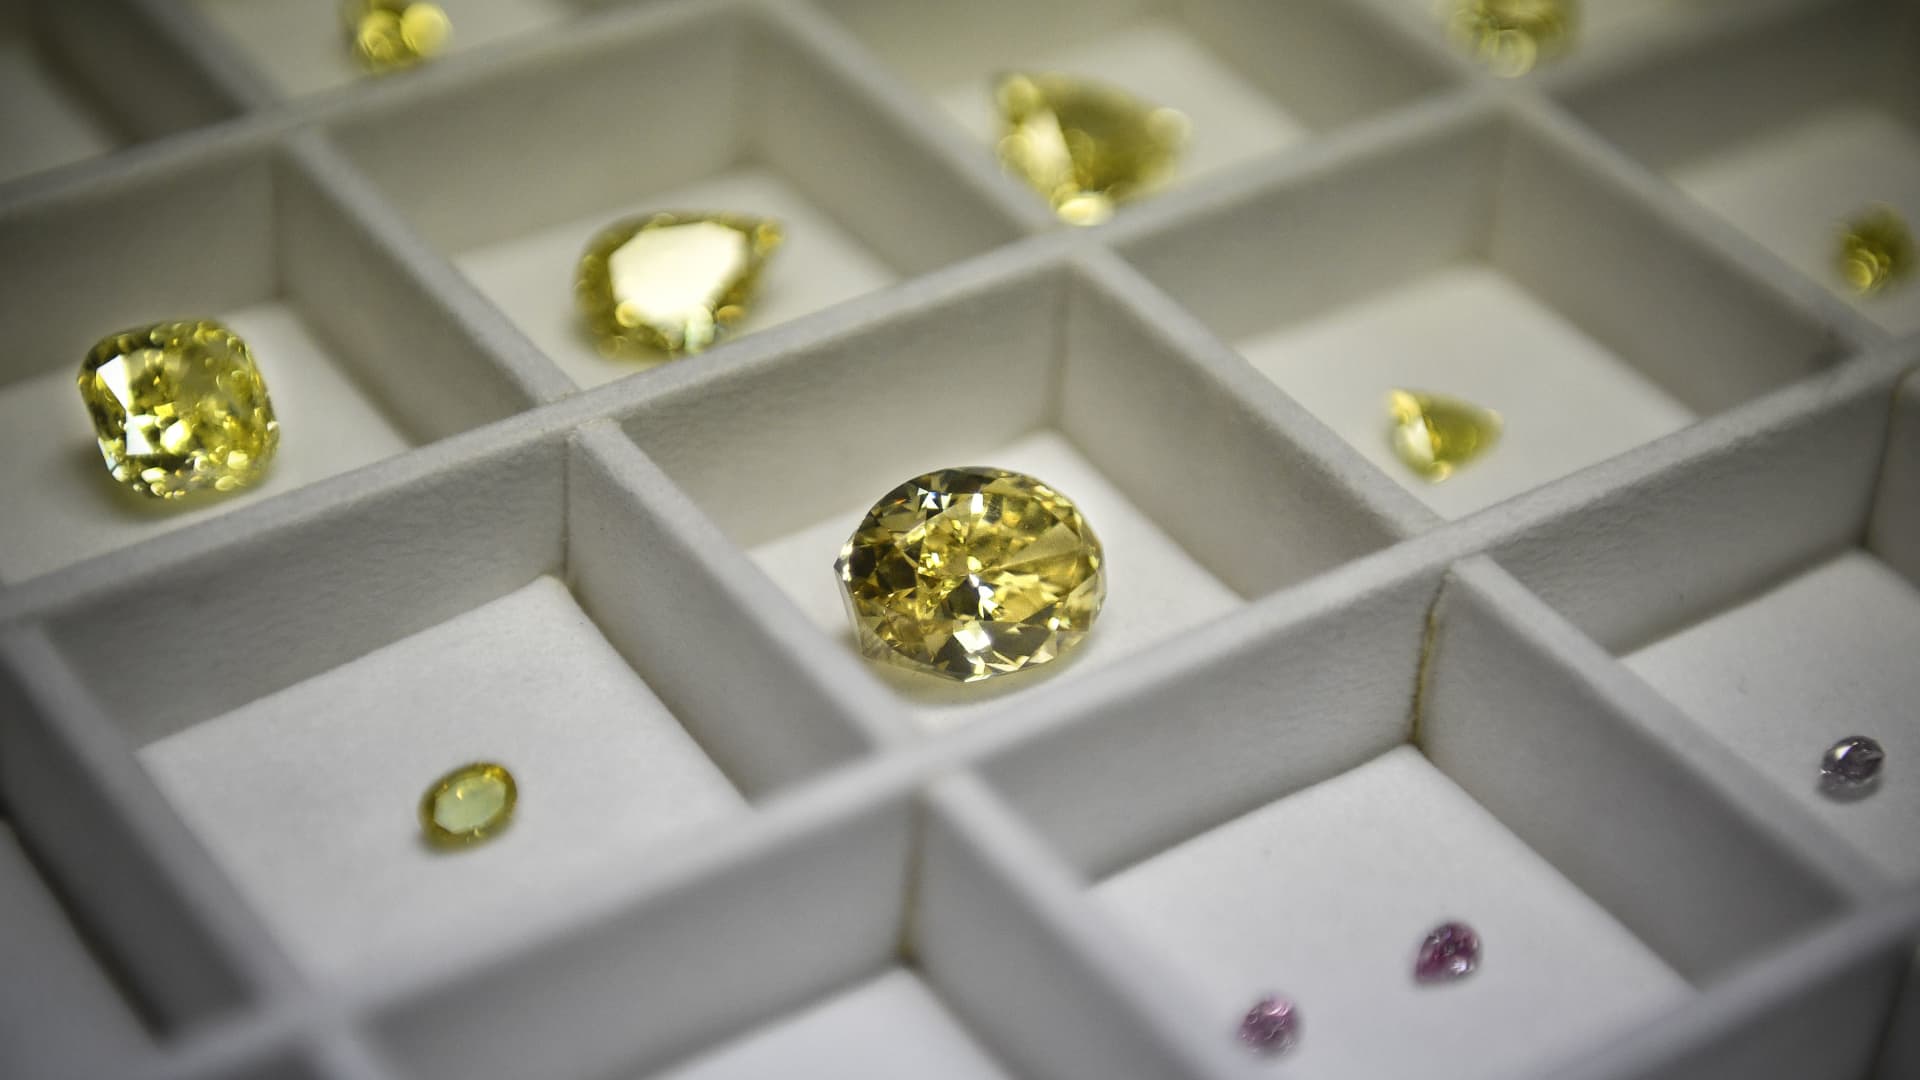 A display of diamonds shows coloured diamonds among other stones at Alrosa Diamond Cutting Division in Moscow on July 3, 2019.